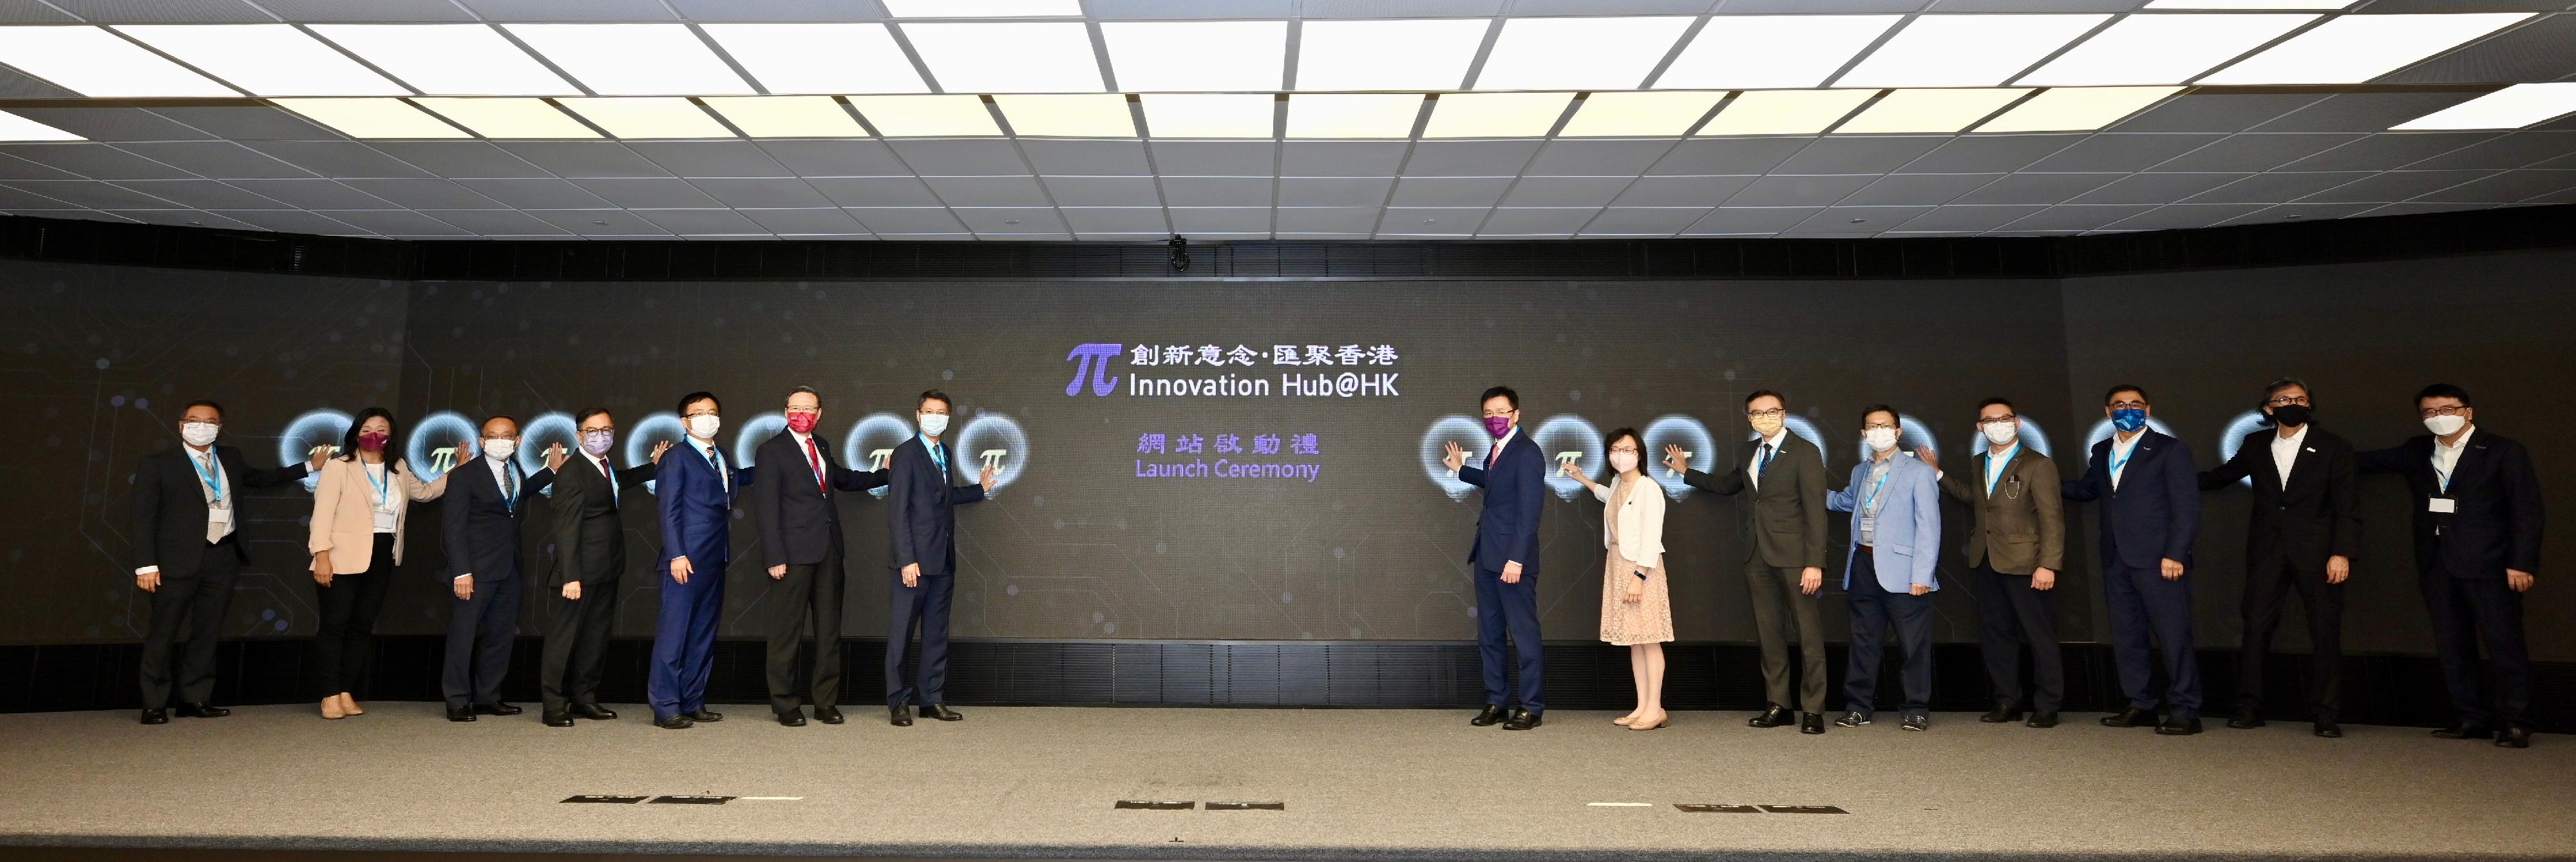 The Secretary for Innovation, Technology and Industry, Professor Sun Dong (eighth right), together with the Permanent Secretary for Innovation, Technology and Industry, Mr Eddie Mak (seventh left); the Commissioner for Innovation and Technology, Ms Rebecca Pun (seventh right); and the representatives of research institutes and universities, officiate at the Innovation and Technology Commission’s Launch Ceremony of the Innovation Hub@HK website today (August 18).